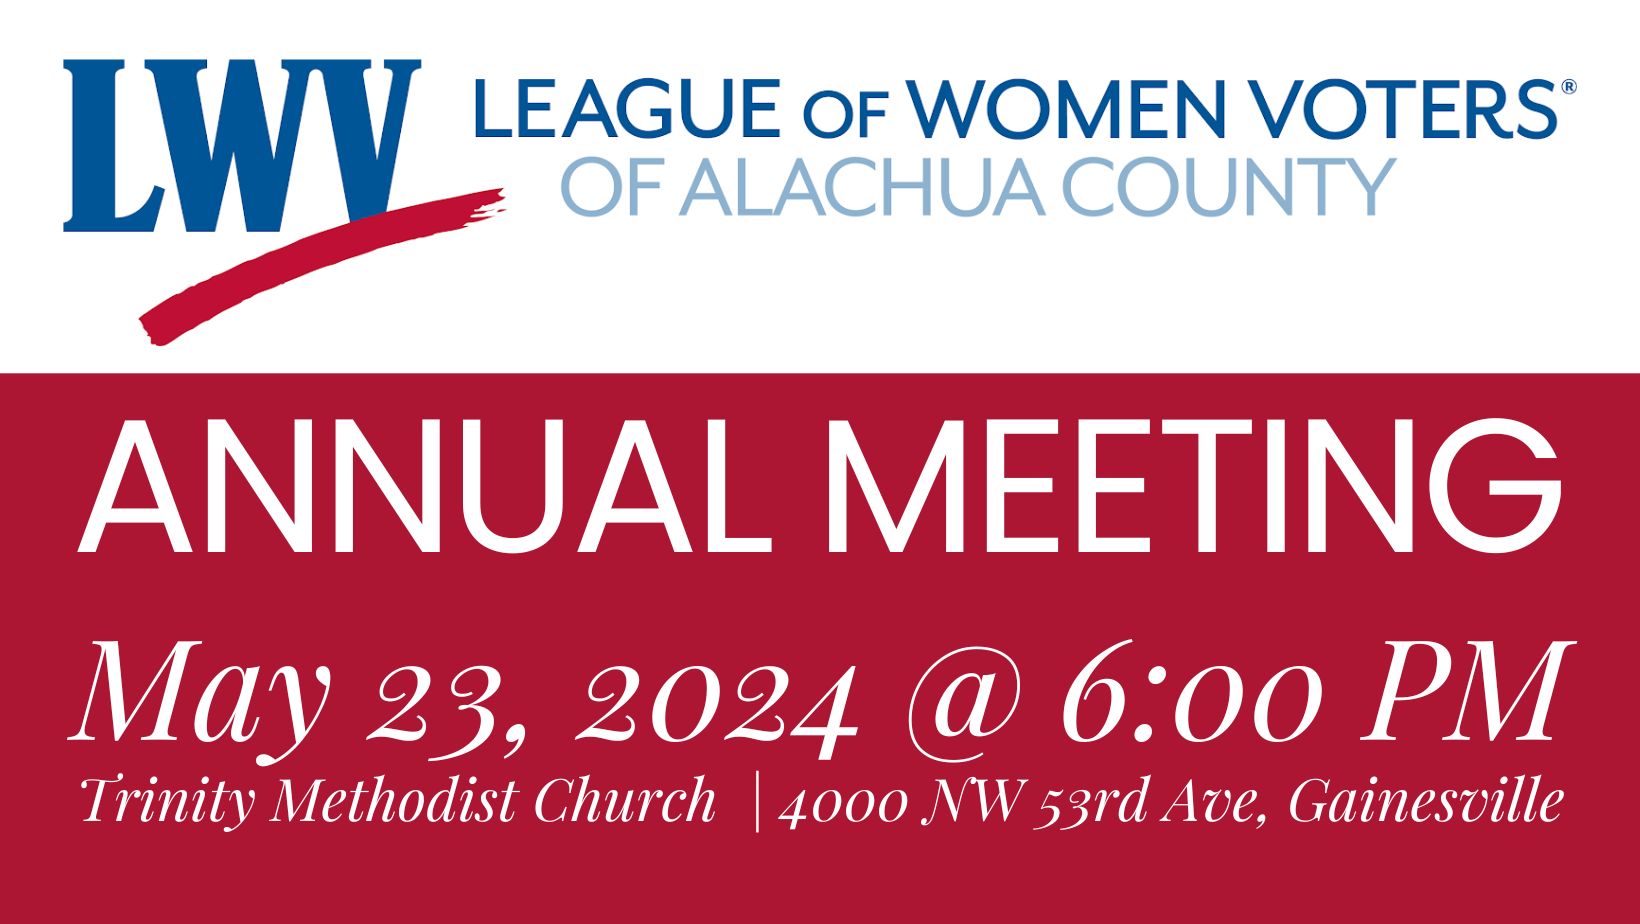 Annual Meeting details on red and white background